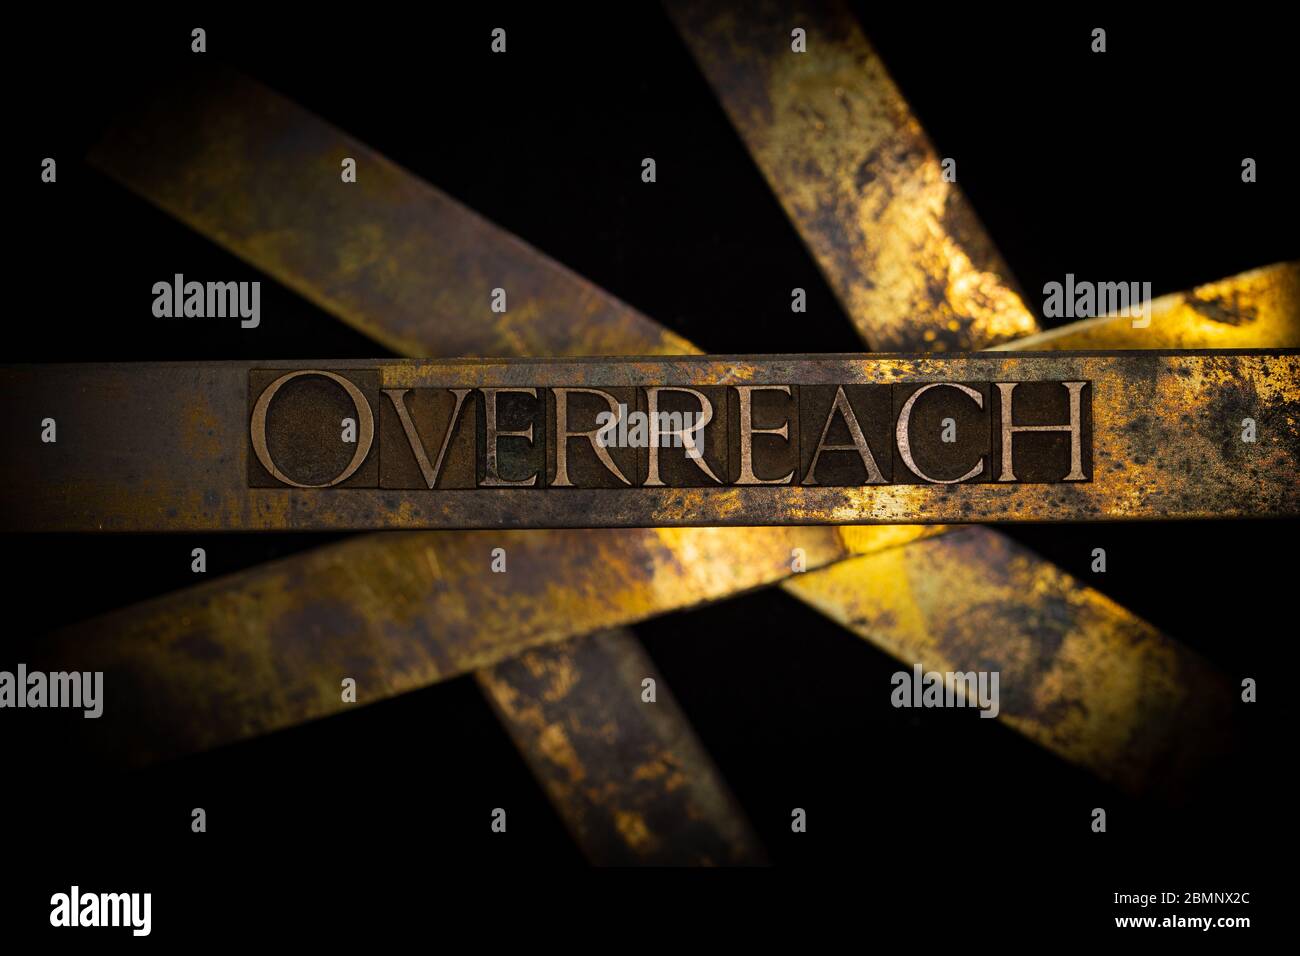 Photo of real authentic typeset letters forming Overreach text on vintage textured grunge copper and black background Stock Photo